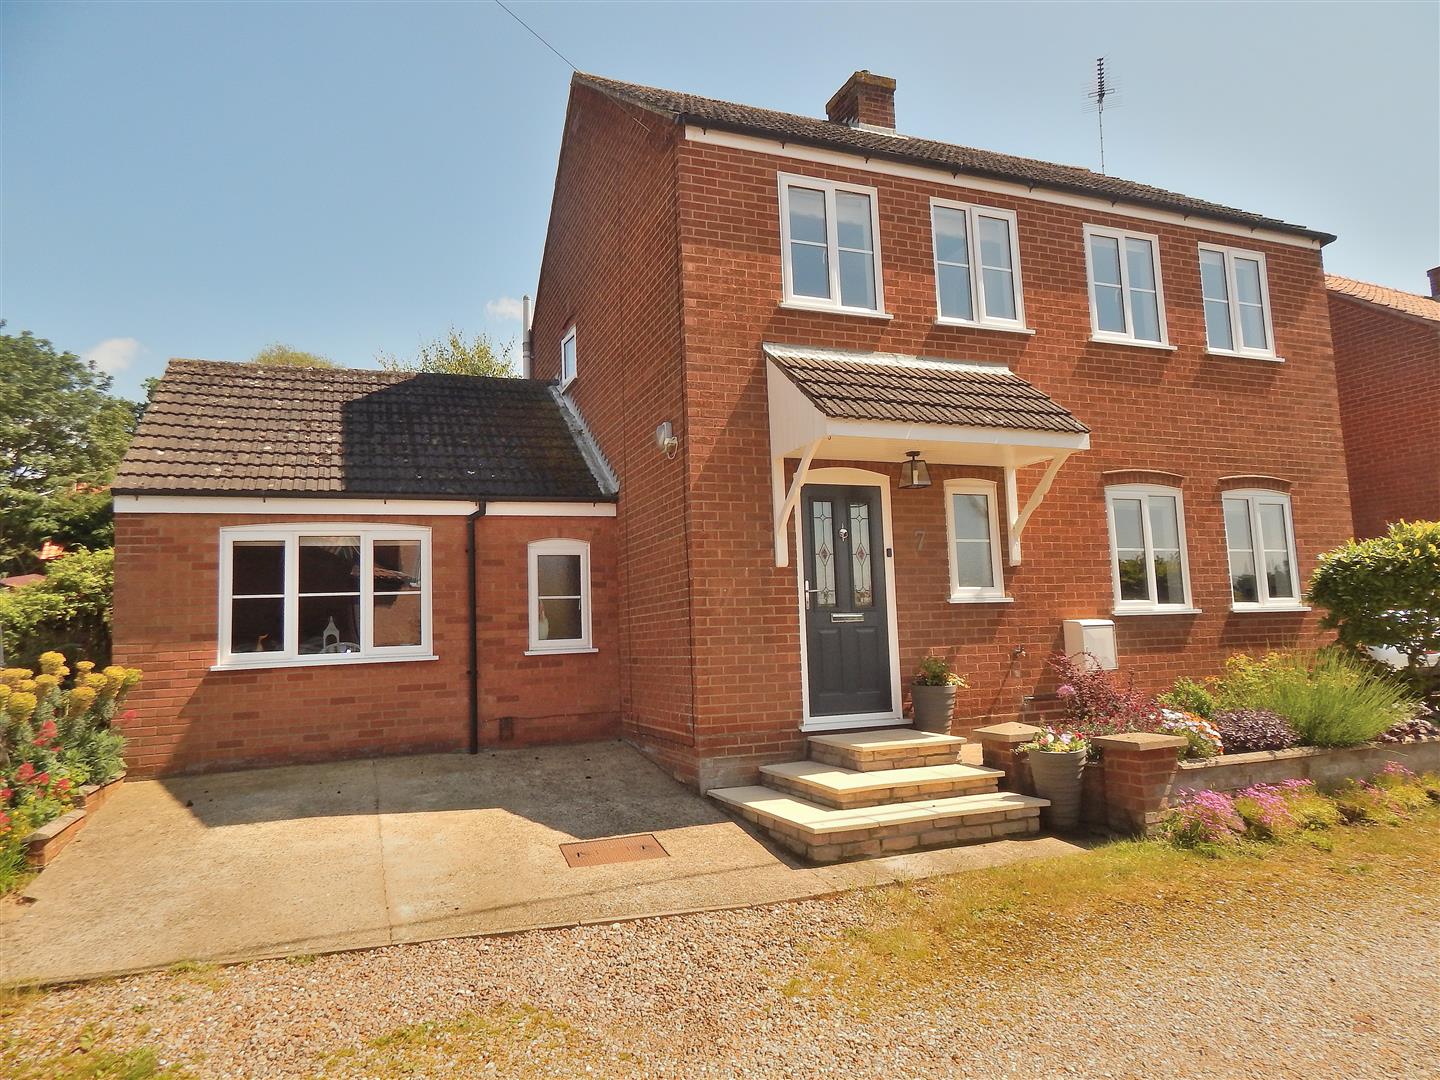 3 bed detached house for sale in Smithy Road, King's Lynn, PE31